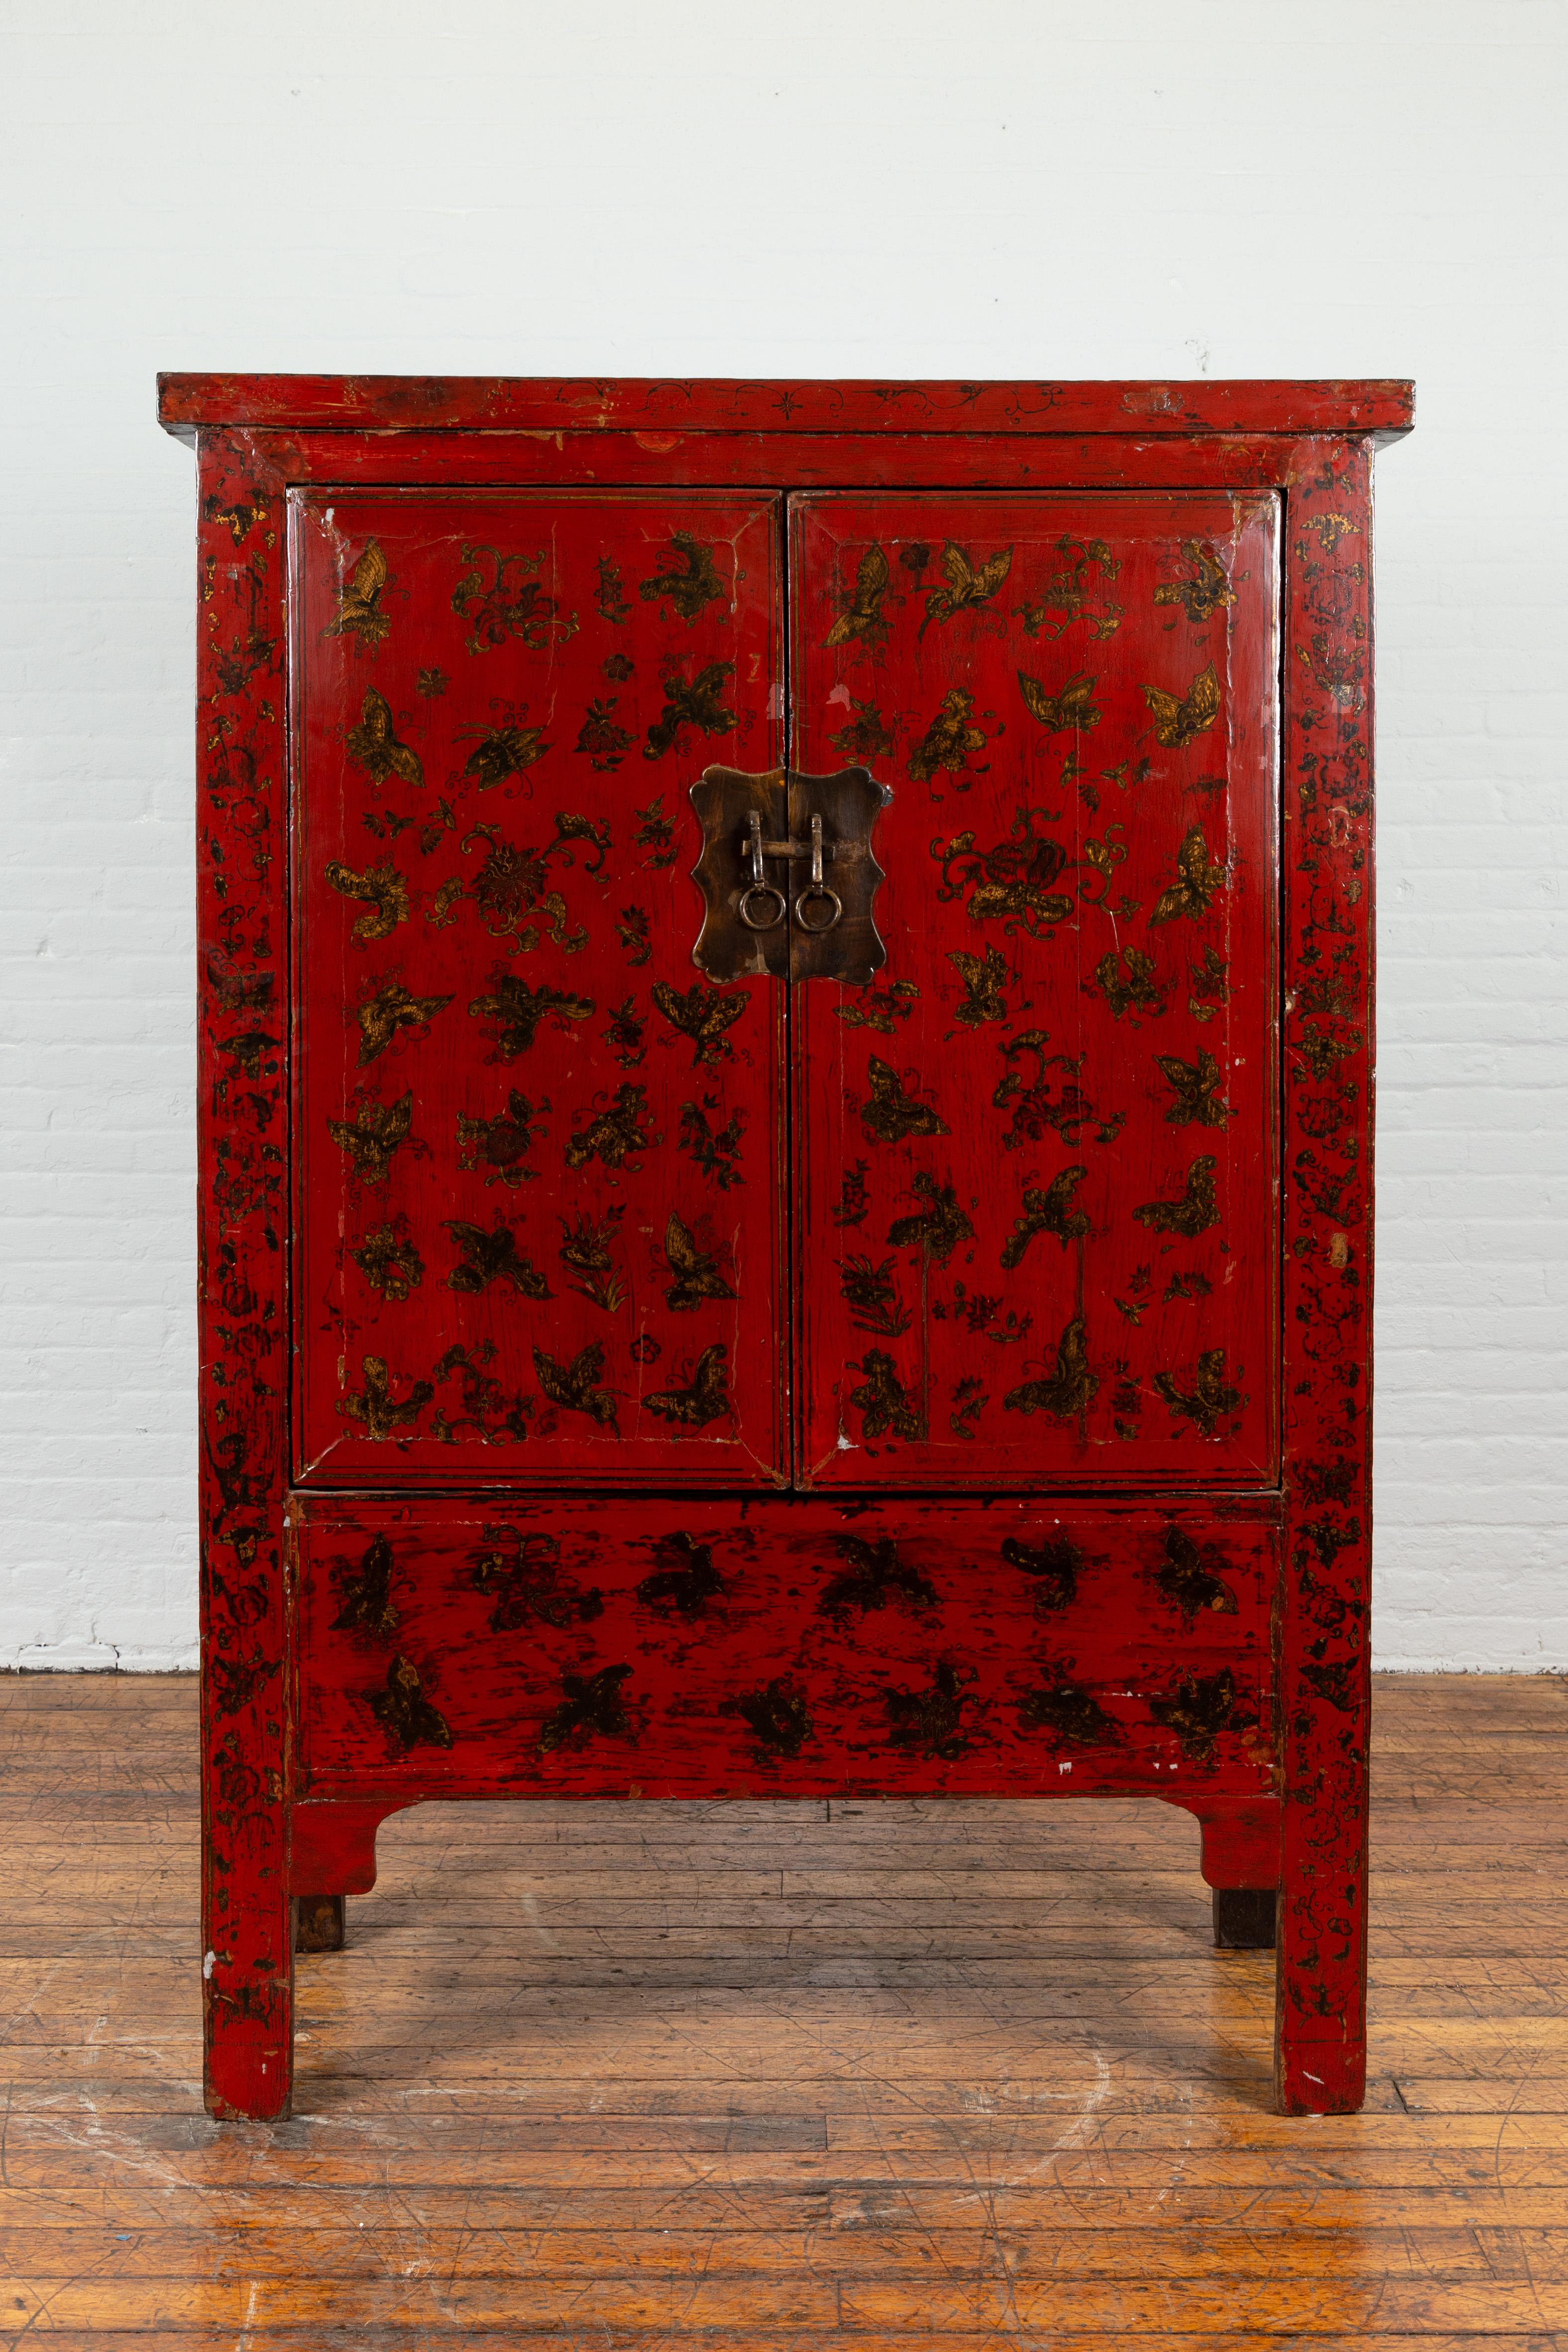 A Chinese Qing Dynasty period red lacquered cabinet from the 19th century, with chinoiserie décor. Created in China during the Qing dynasty, this cabinet captures our attention with its red lacquered finish perfectly adorned with chinoiserie motifs